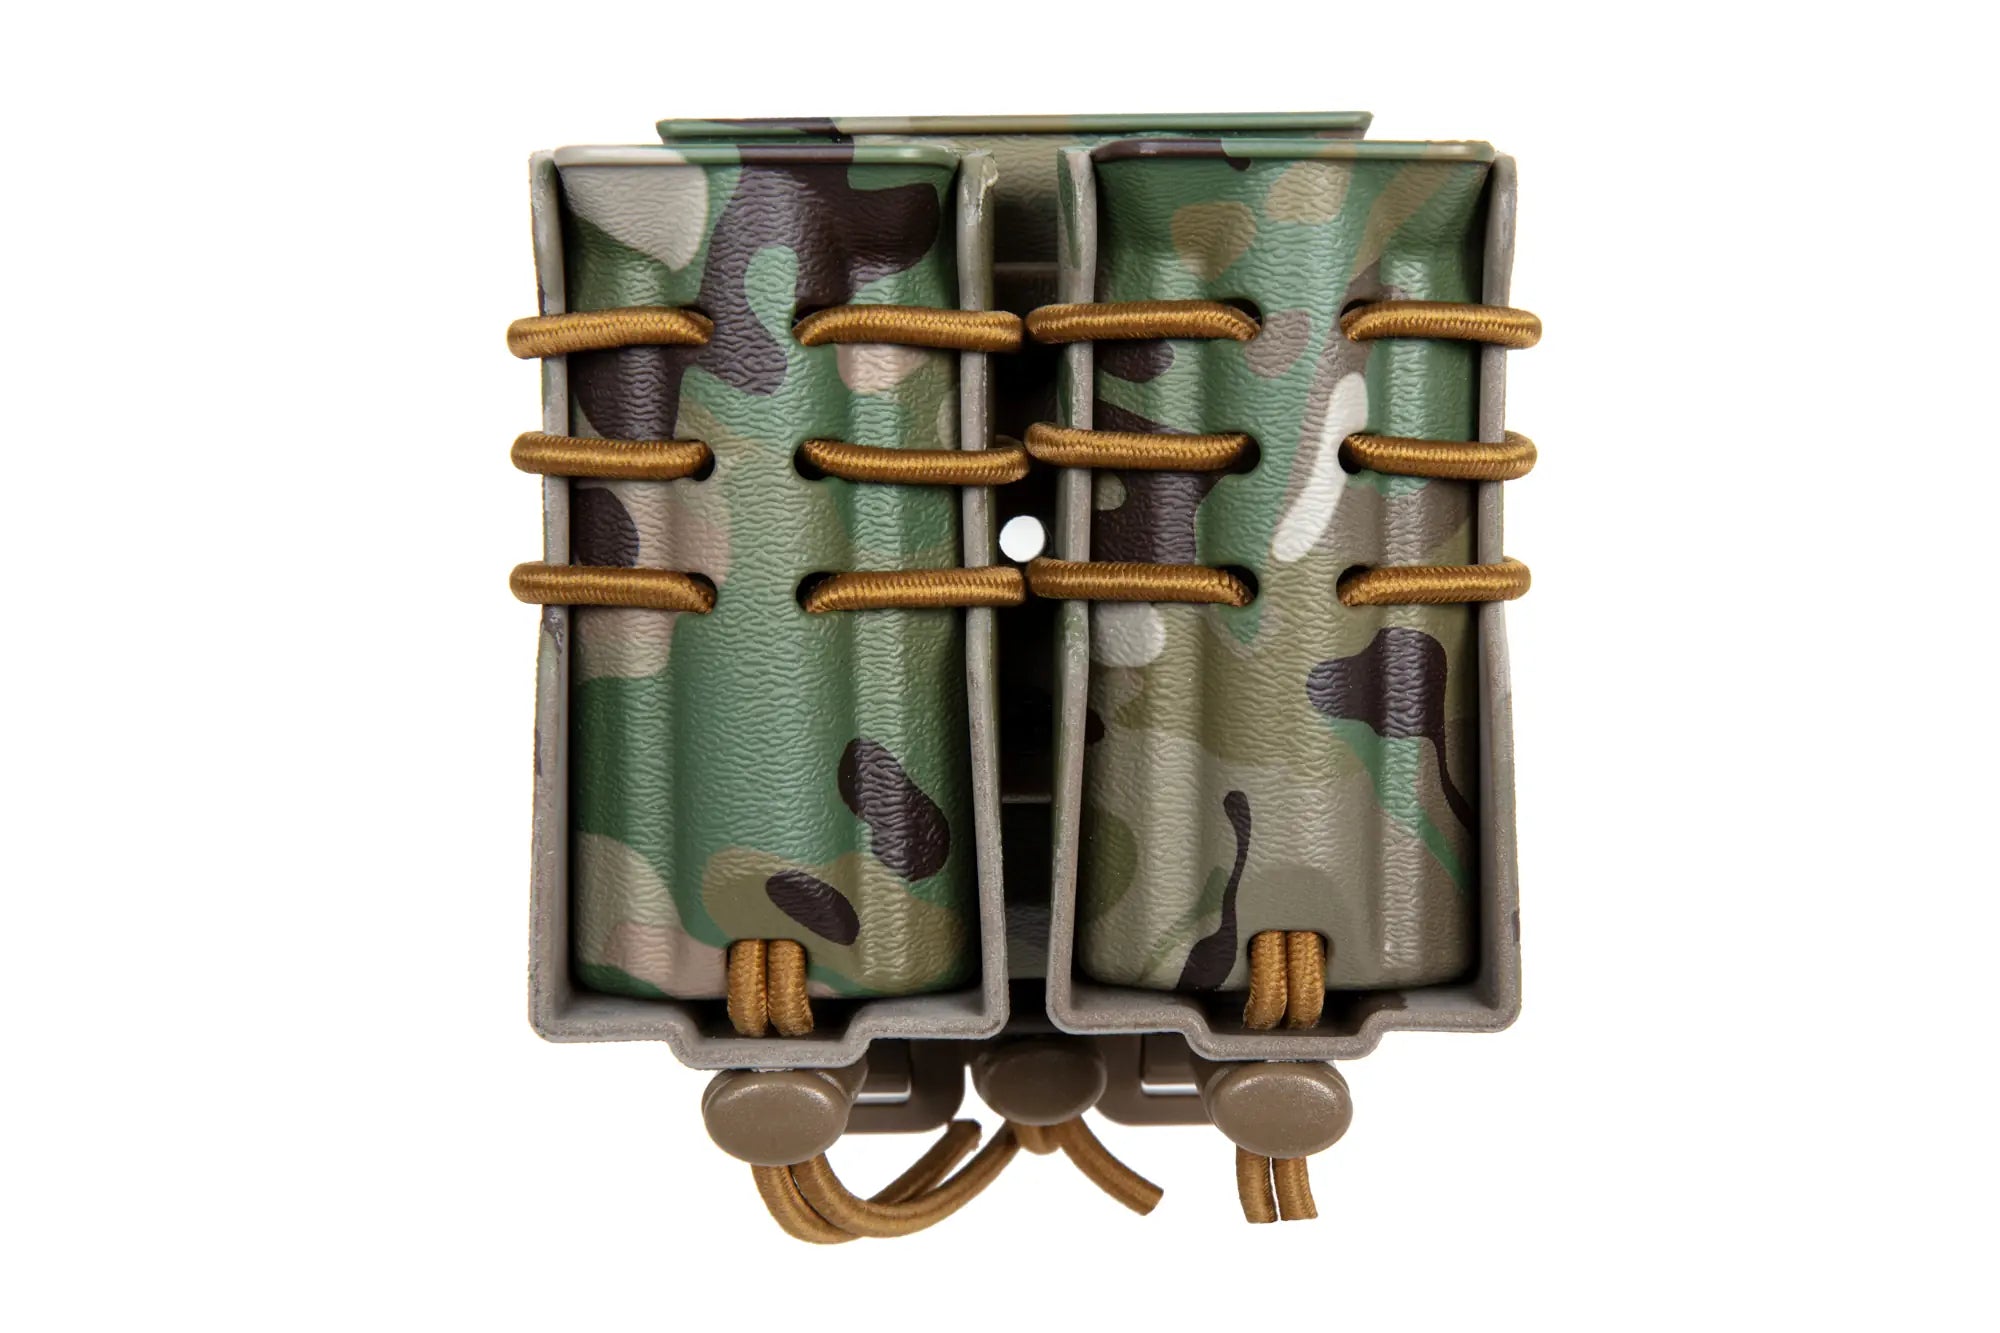 Carrier for 2 9mm magazines and an M4/M16 magazine Wosport Urban Assault Quick Pull Multicam-2